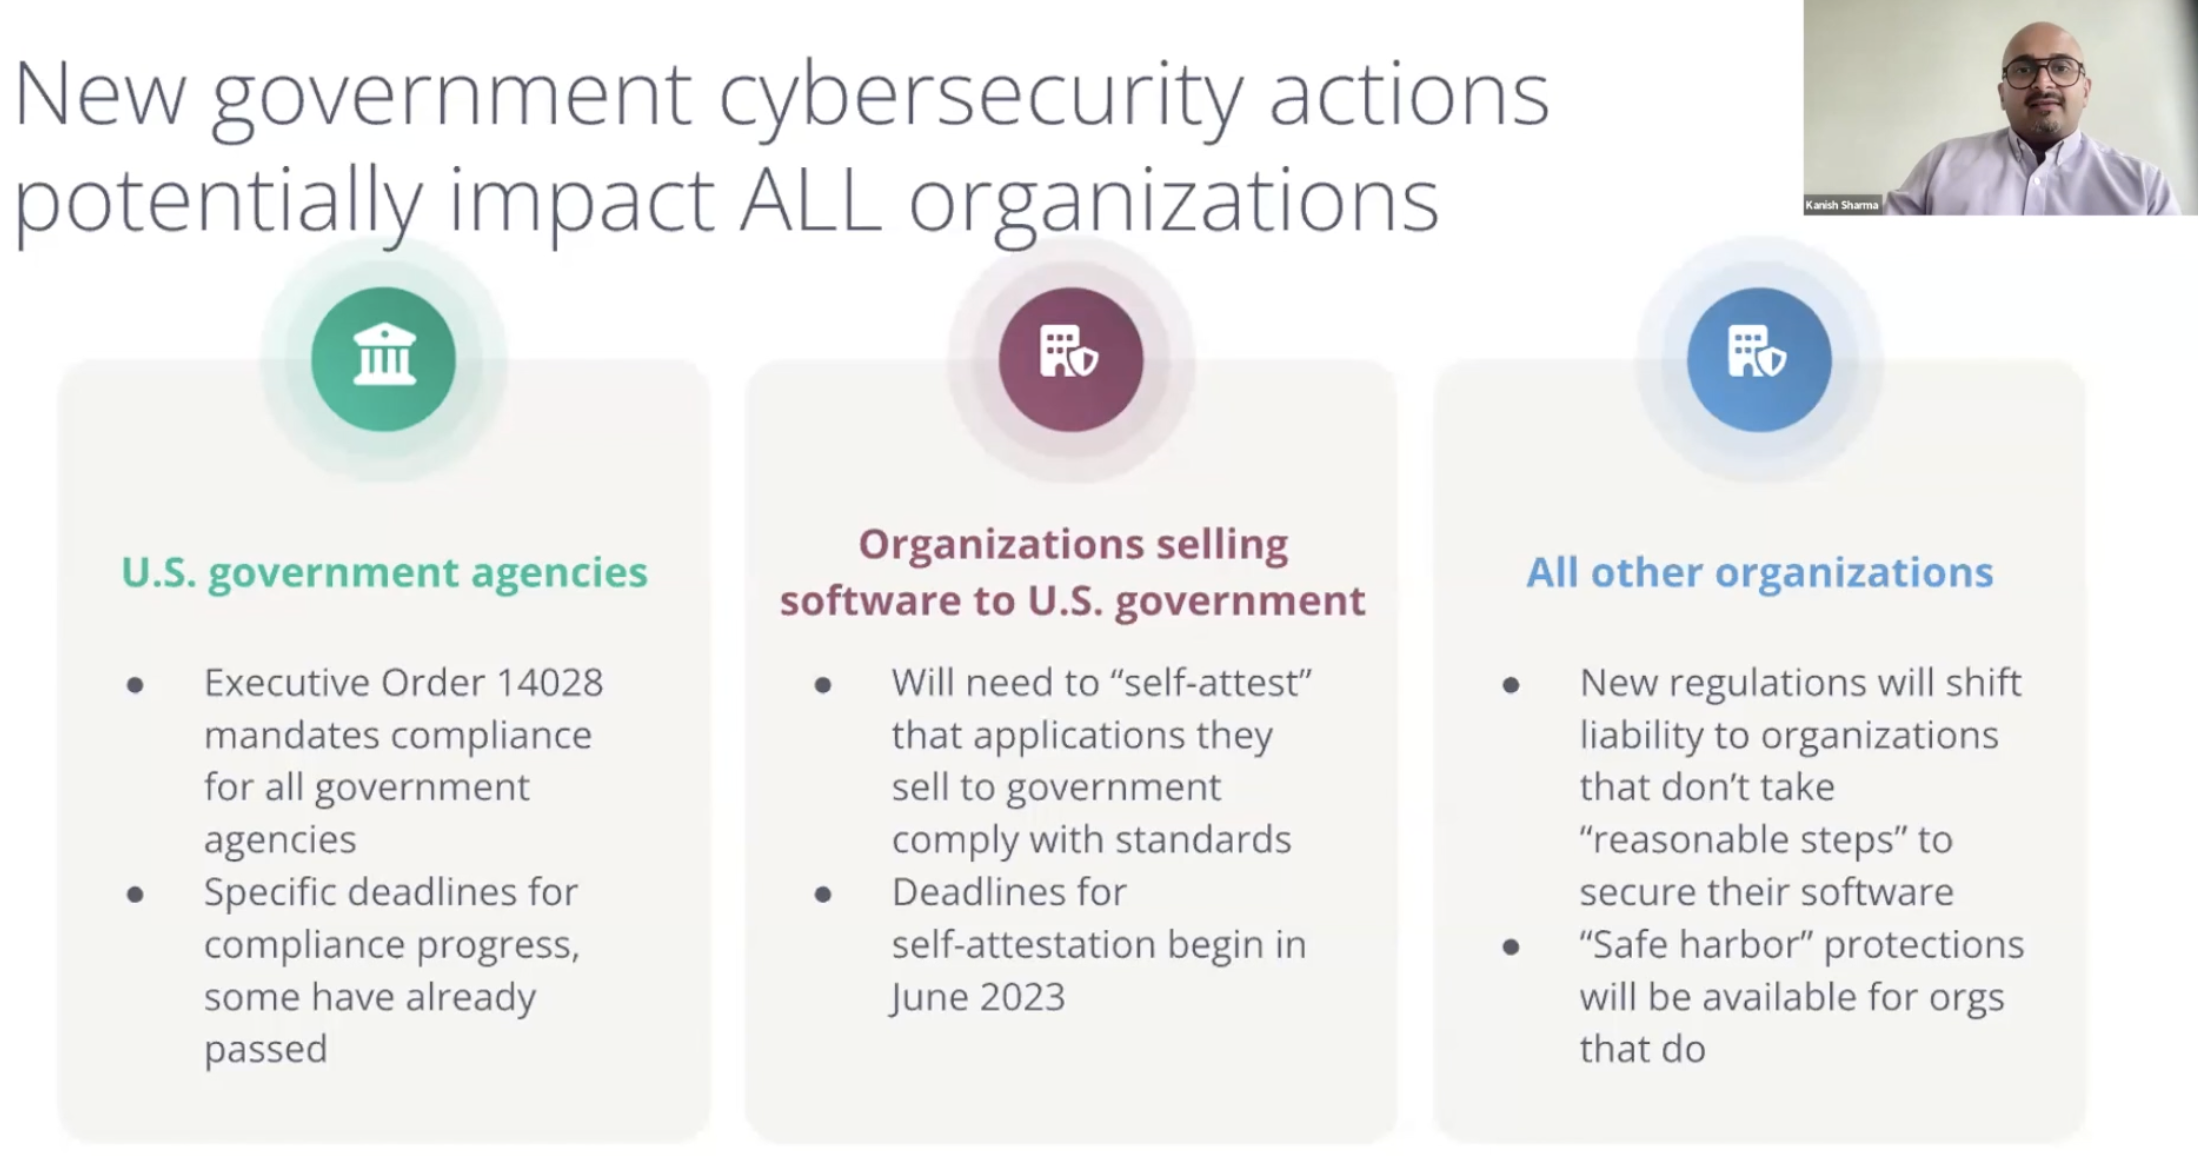 New government cybersecurity actions potentially impact ALL organizations